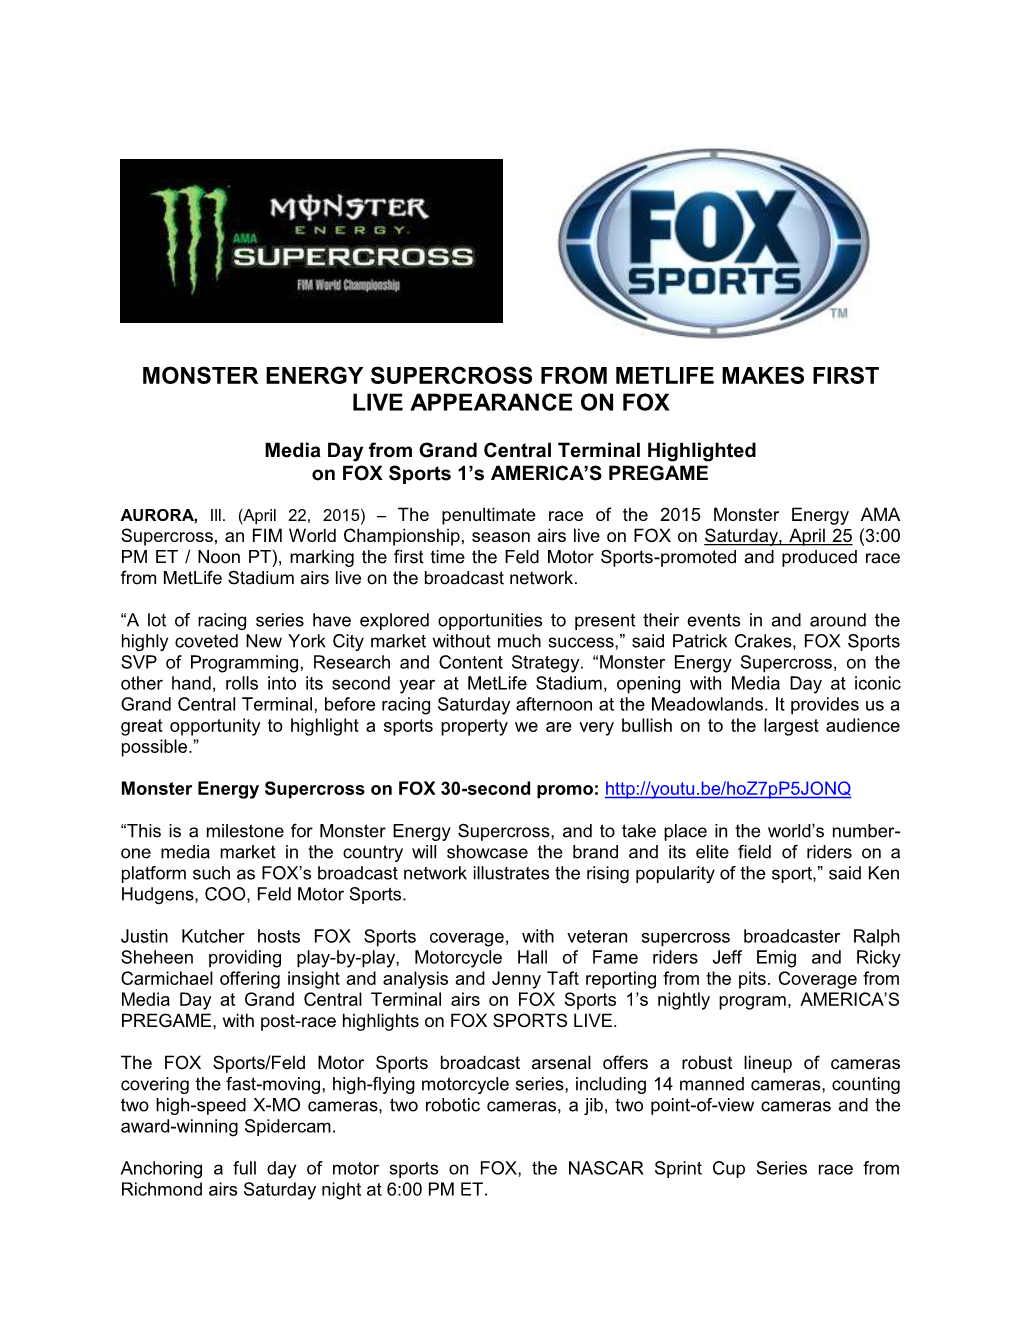 Monster Energy Supercross from Metlife Makes First Live Appearance on Fox